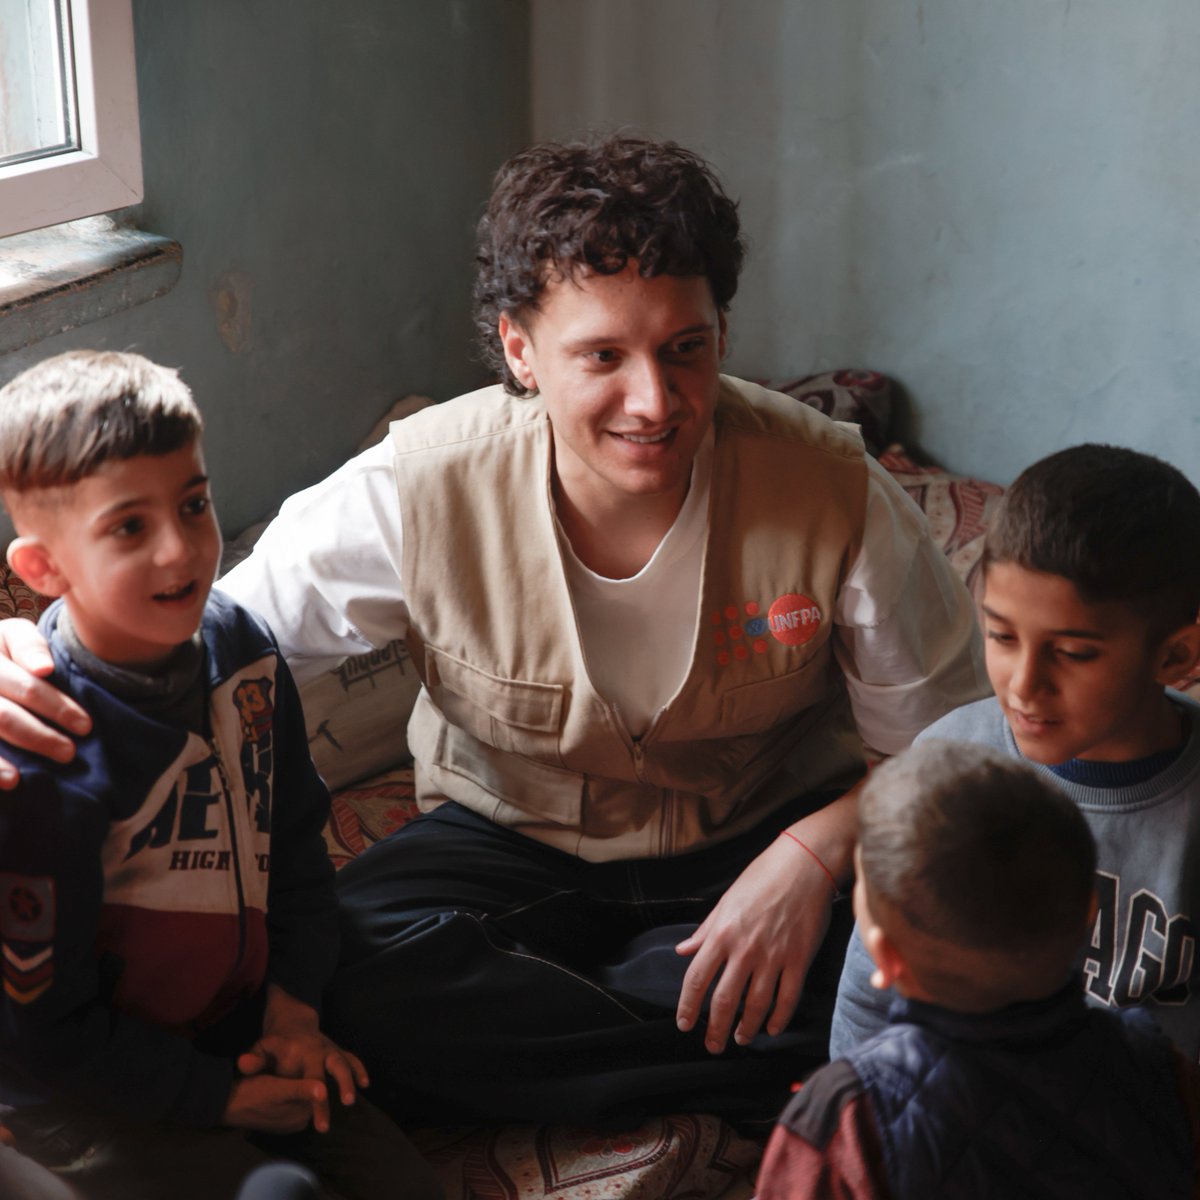 Today is #23April 🧡 Every child deserves to live with equal rights and opportunities. But the vital needs of children and young people in the earthquake region continue. Hear from our Honorary Ambassadors @hazalkaya110 & @edisgorgulu how we can support 👉unf.pa/3Uukeo9